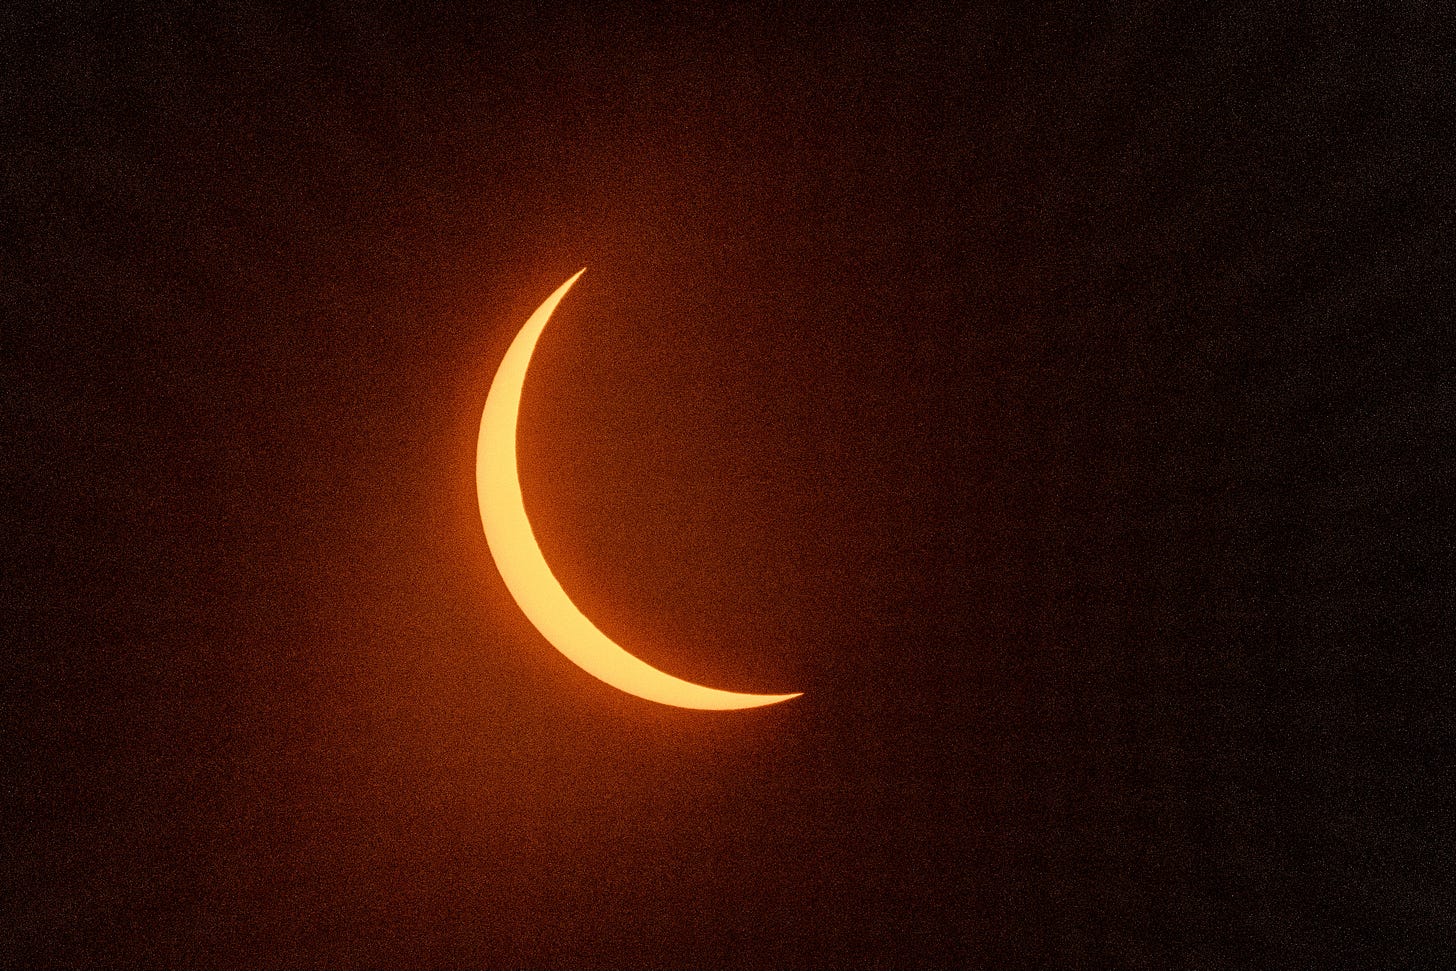 A slender orange crescent, slightly furred from lens glare, of the sun in partial solar eclipse